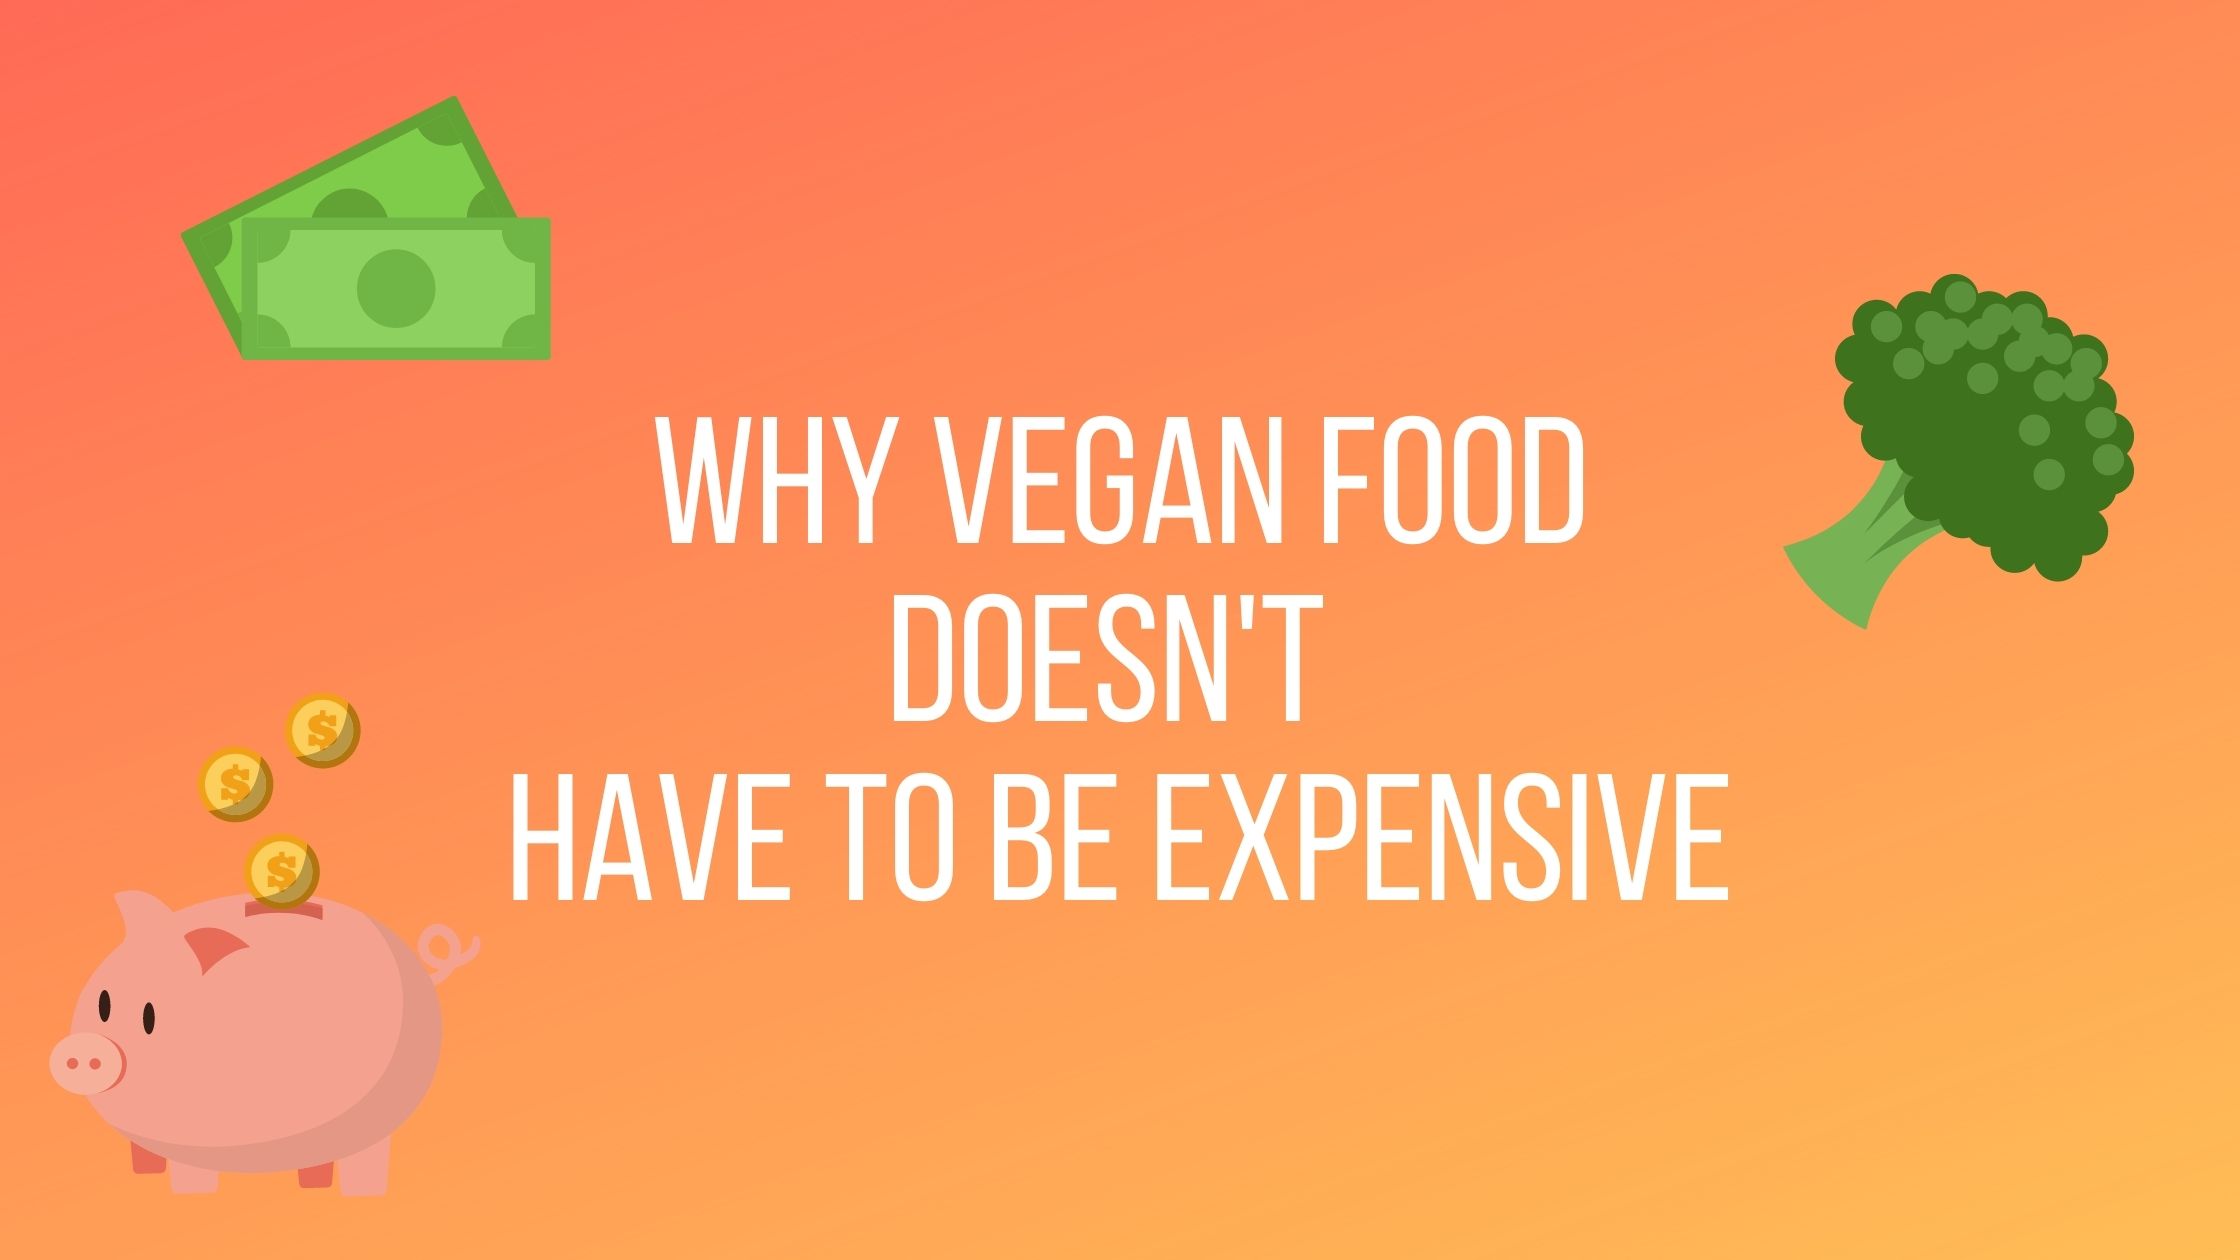 Why vegan food doesn't need to be expensive